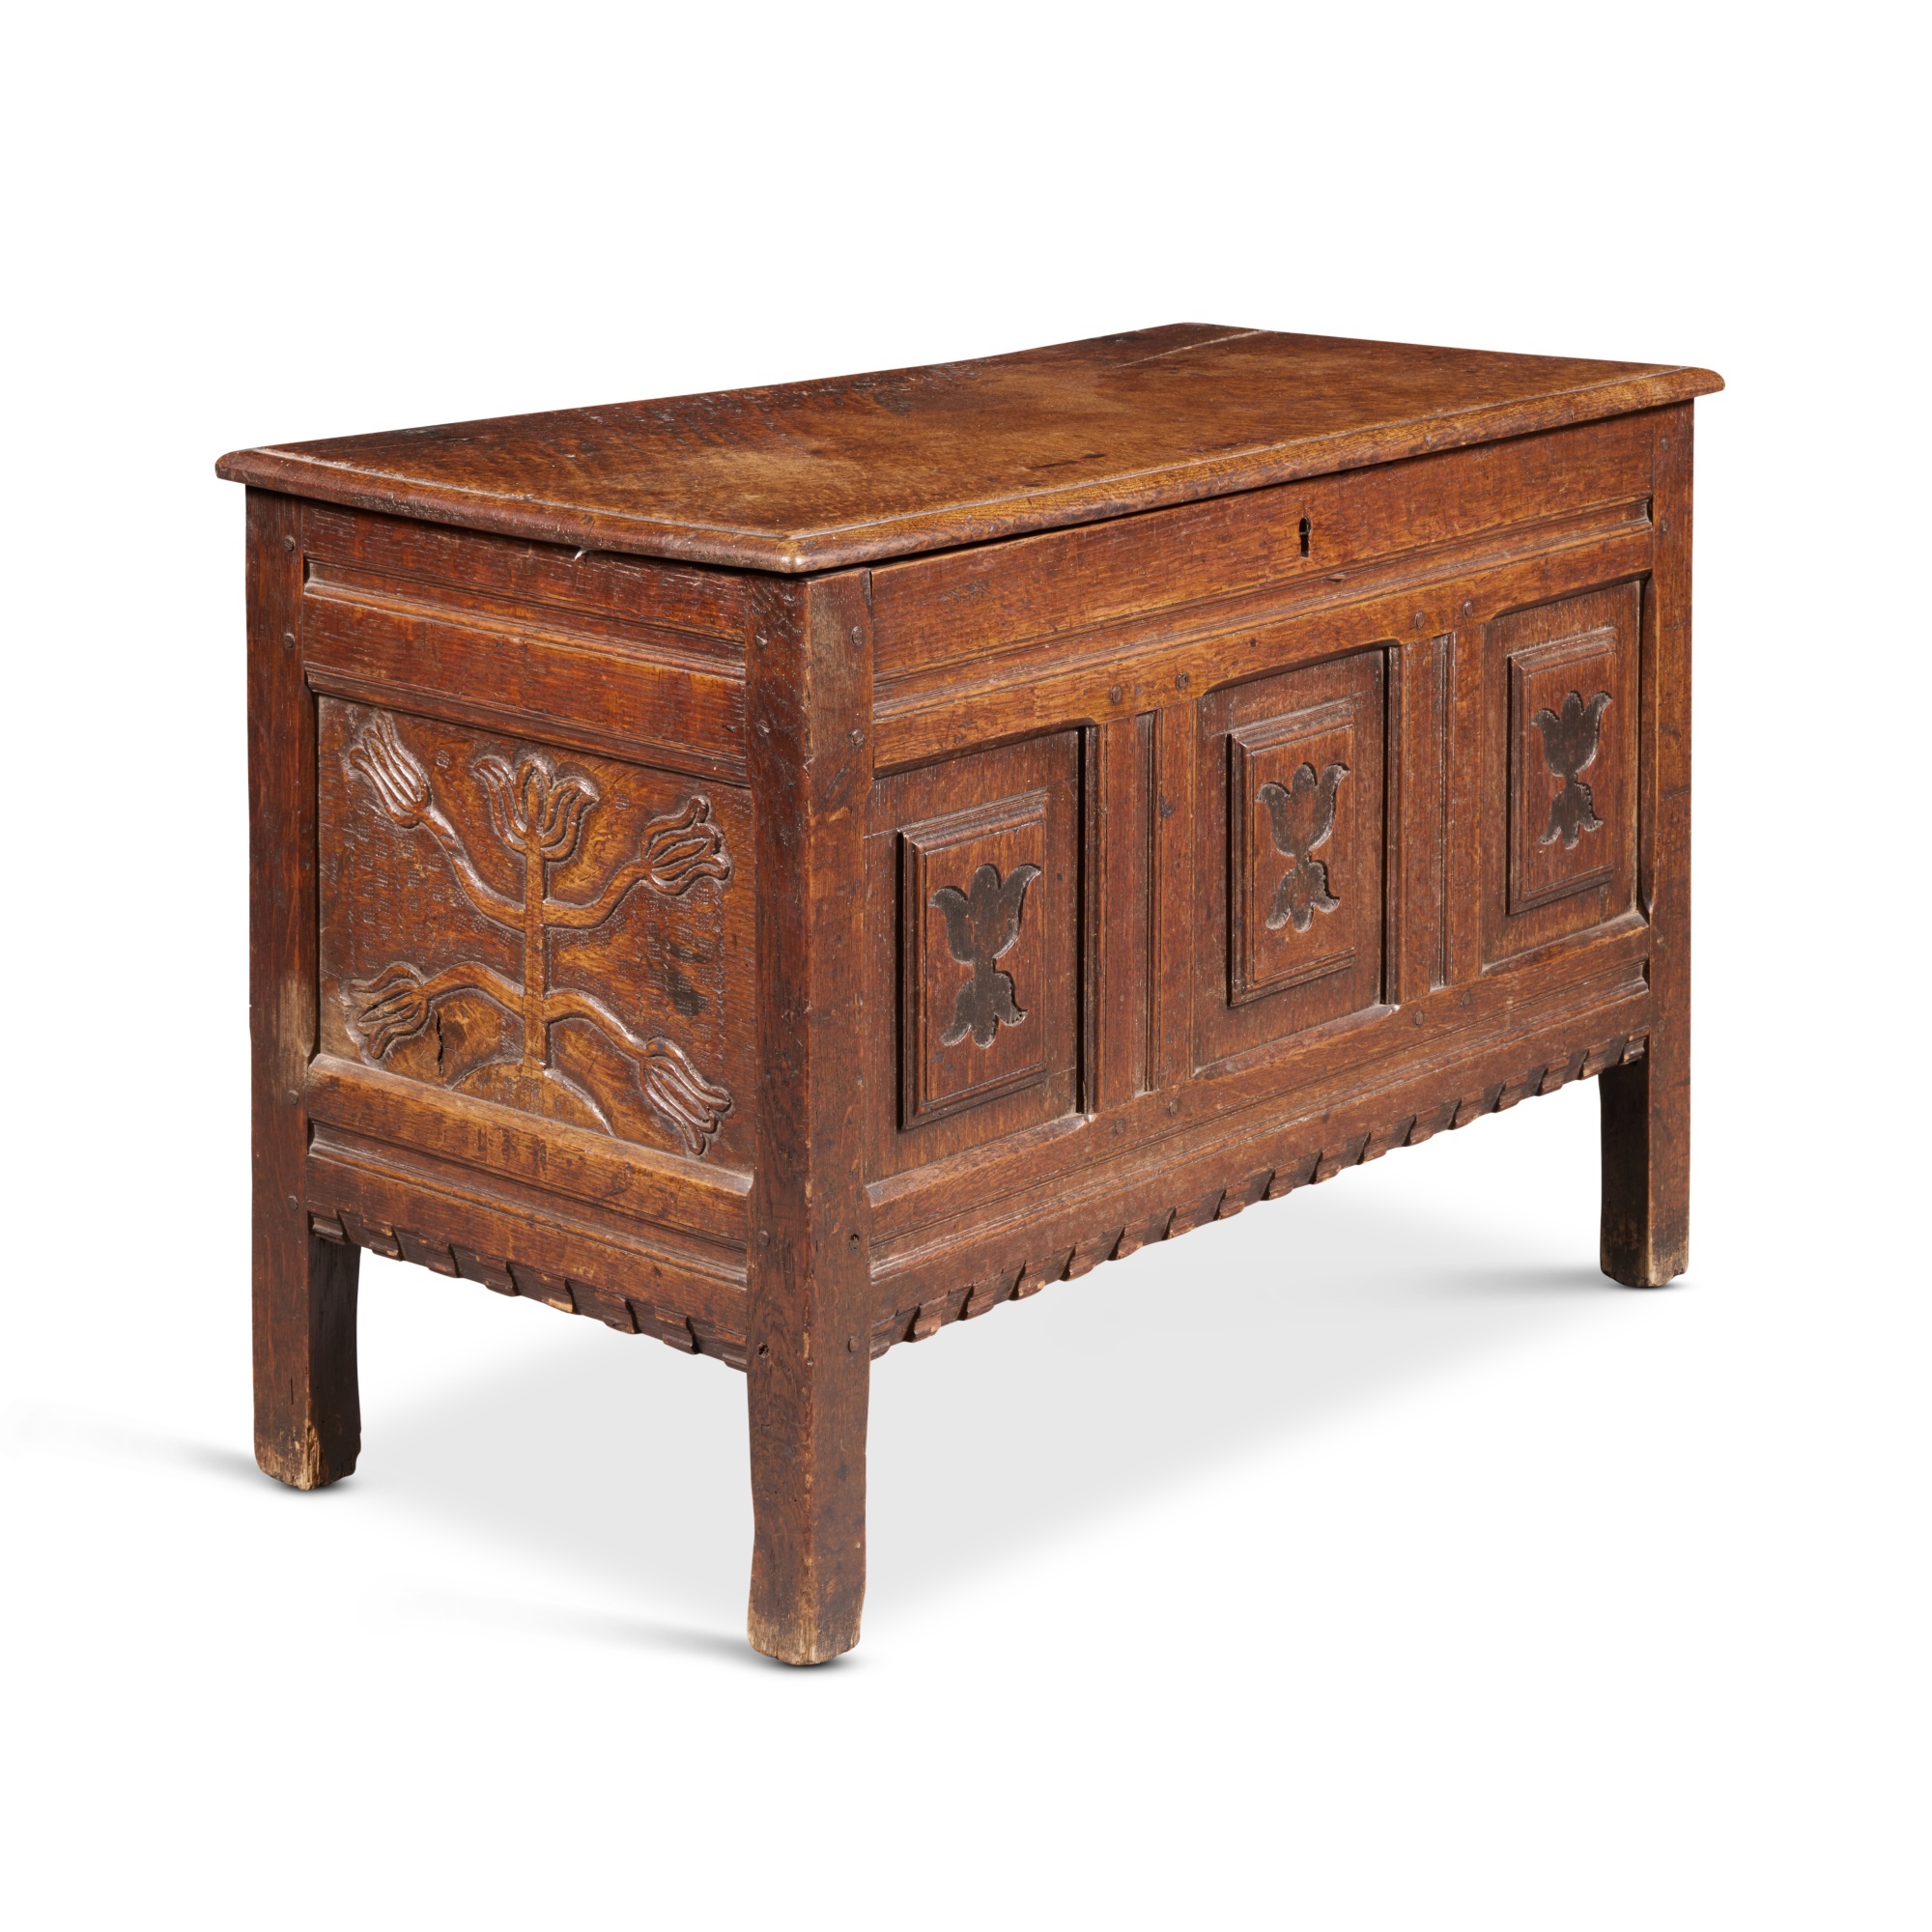 A Dutch Mannerist Carved Oak Chest, late 16th Century - Image 3 of 5